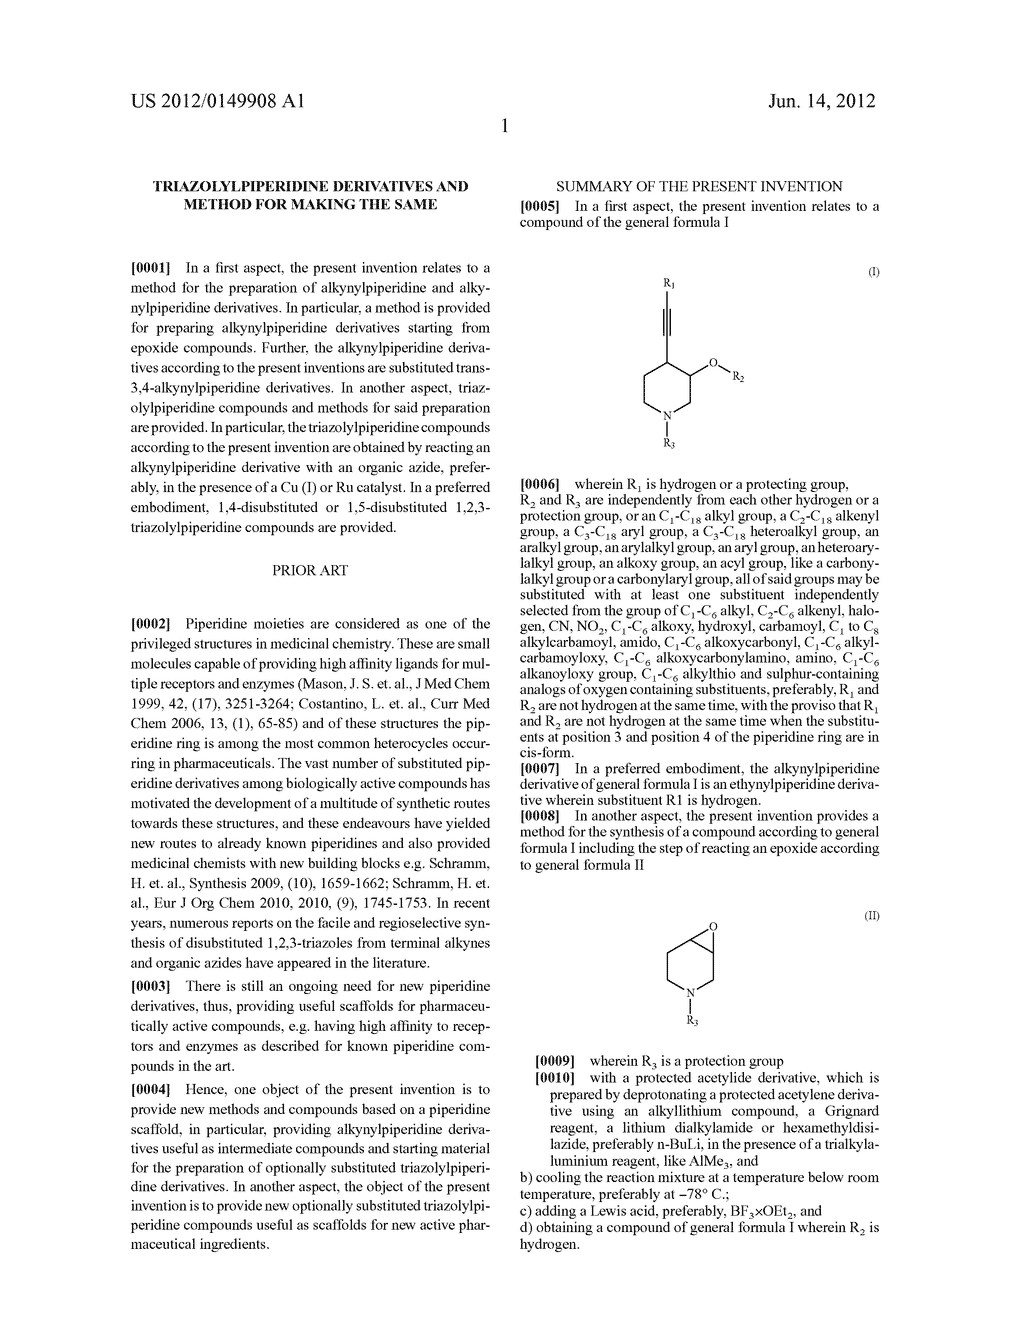 TRIAZOLYLPIPERIDINE DERIVATIVES AND METHOD FOR MAKING THE SAME - diagram, schematic, and image 07